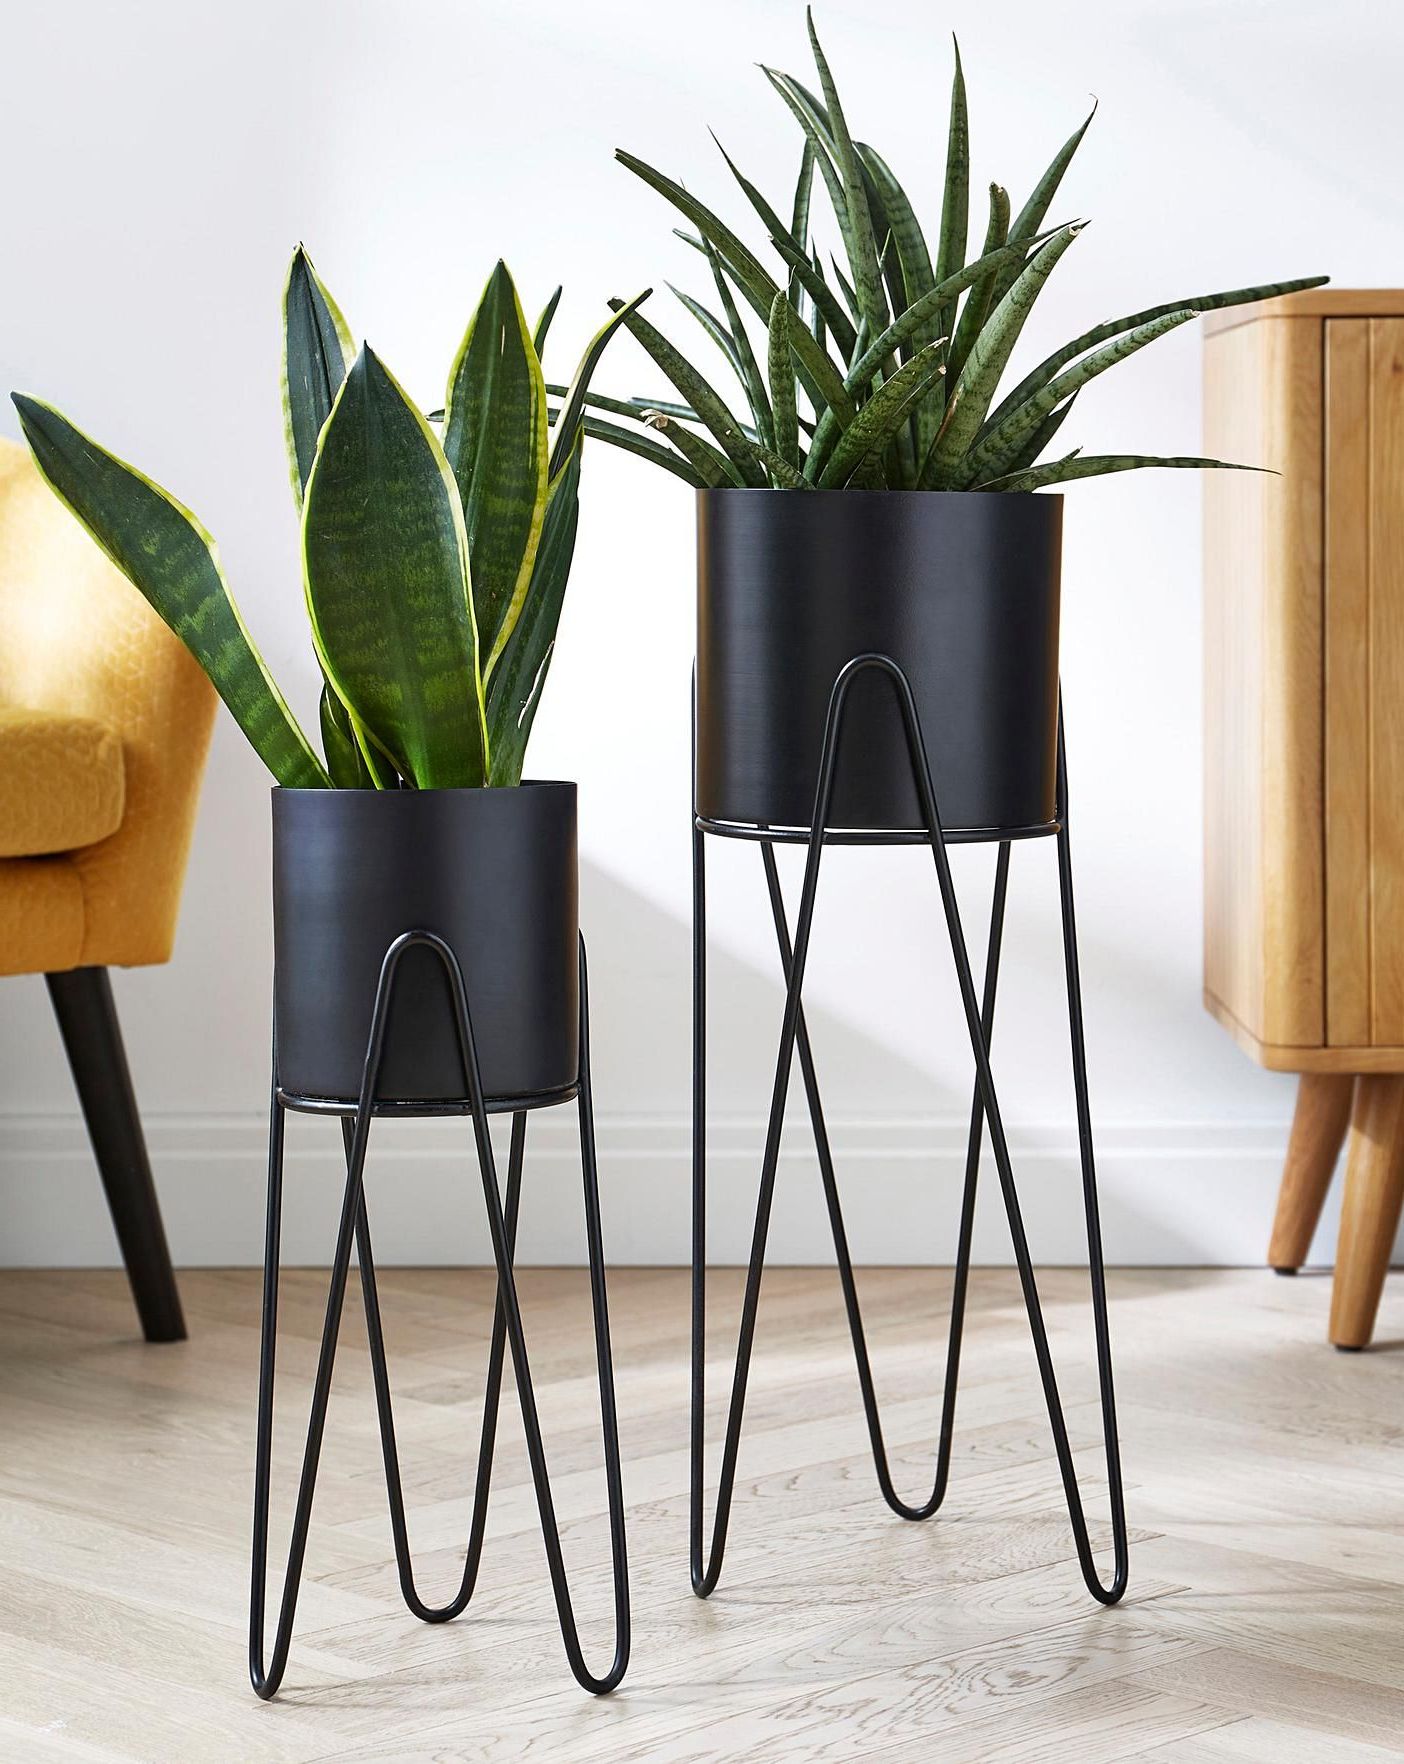 Best Indoor Plant Pot Stands – Plant Stands, Planter On Legs Pertaining To Latest Nickel Plant Stands (View 8 of 10)